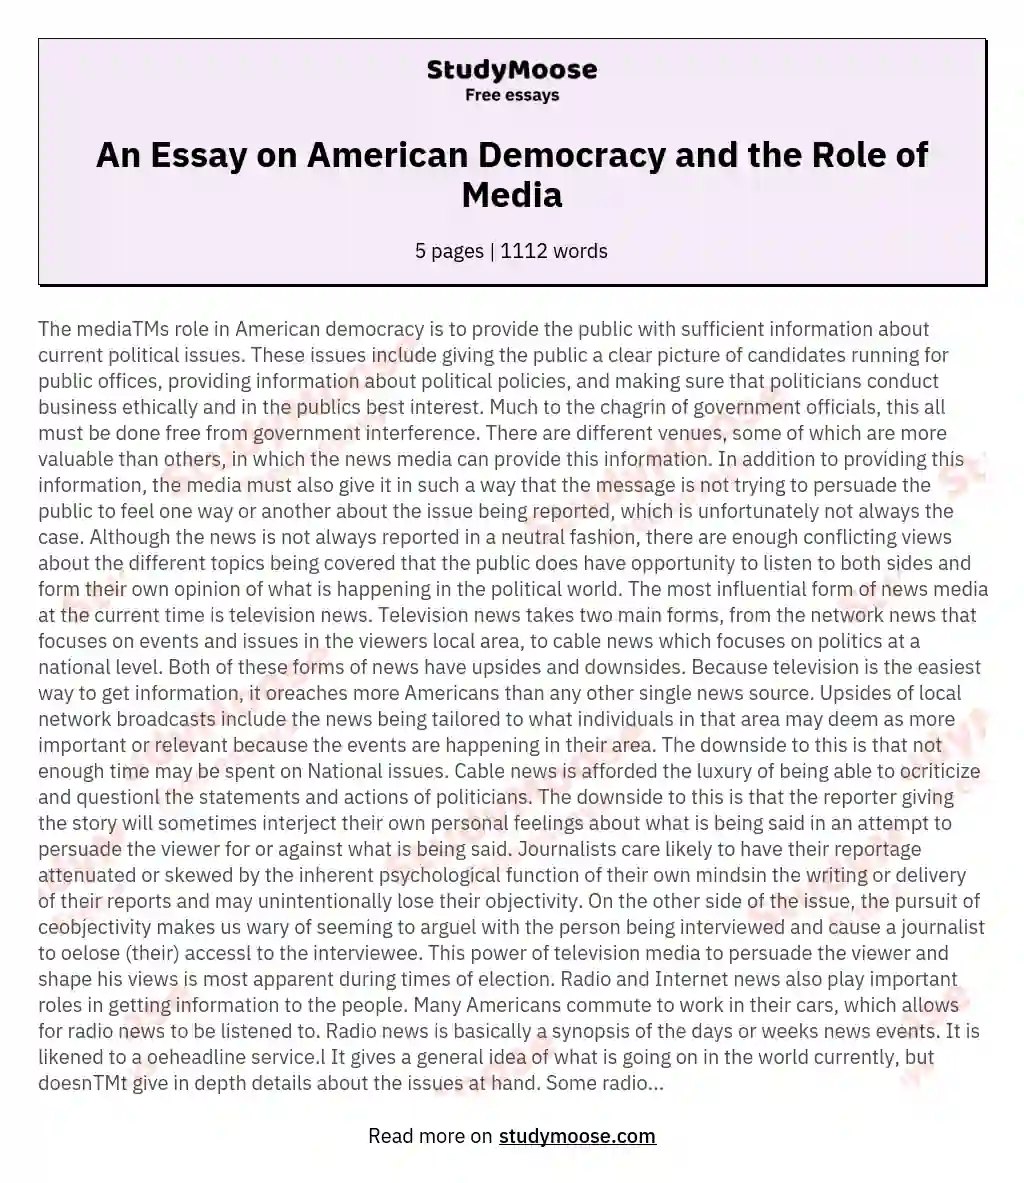 An Essay on American Democracy and the Role of Media essay